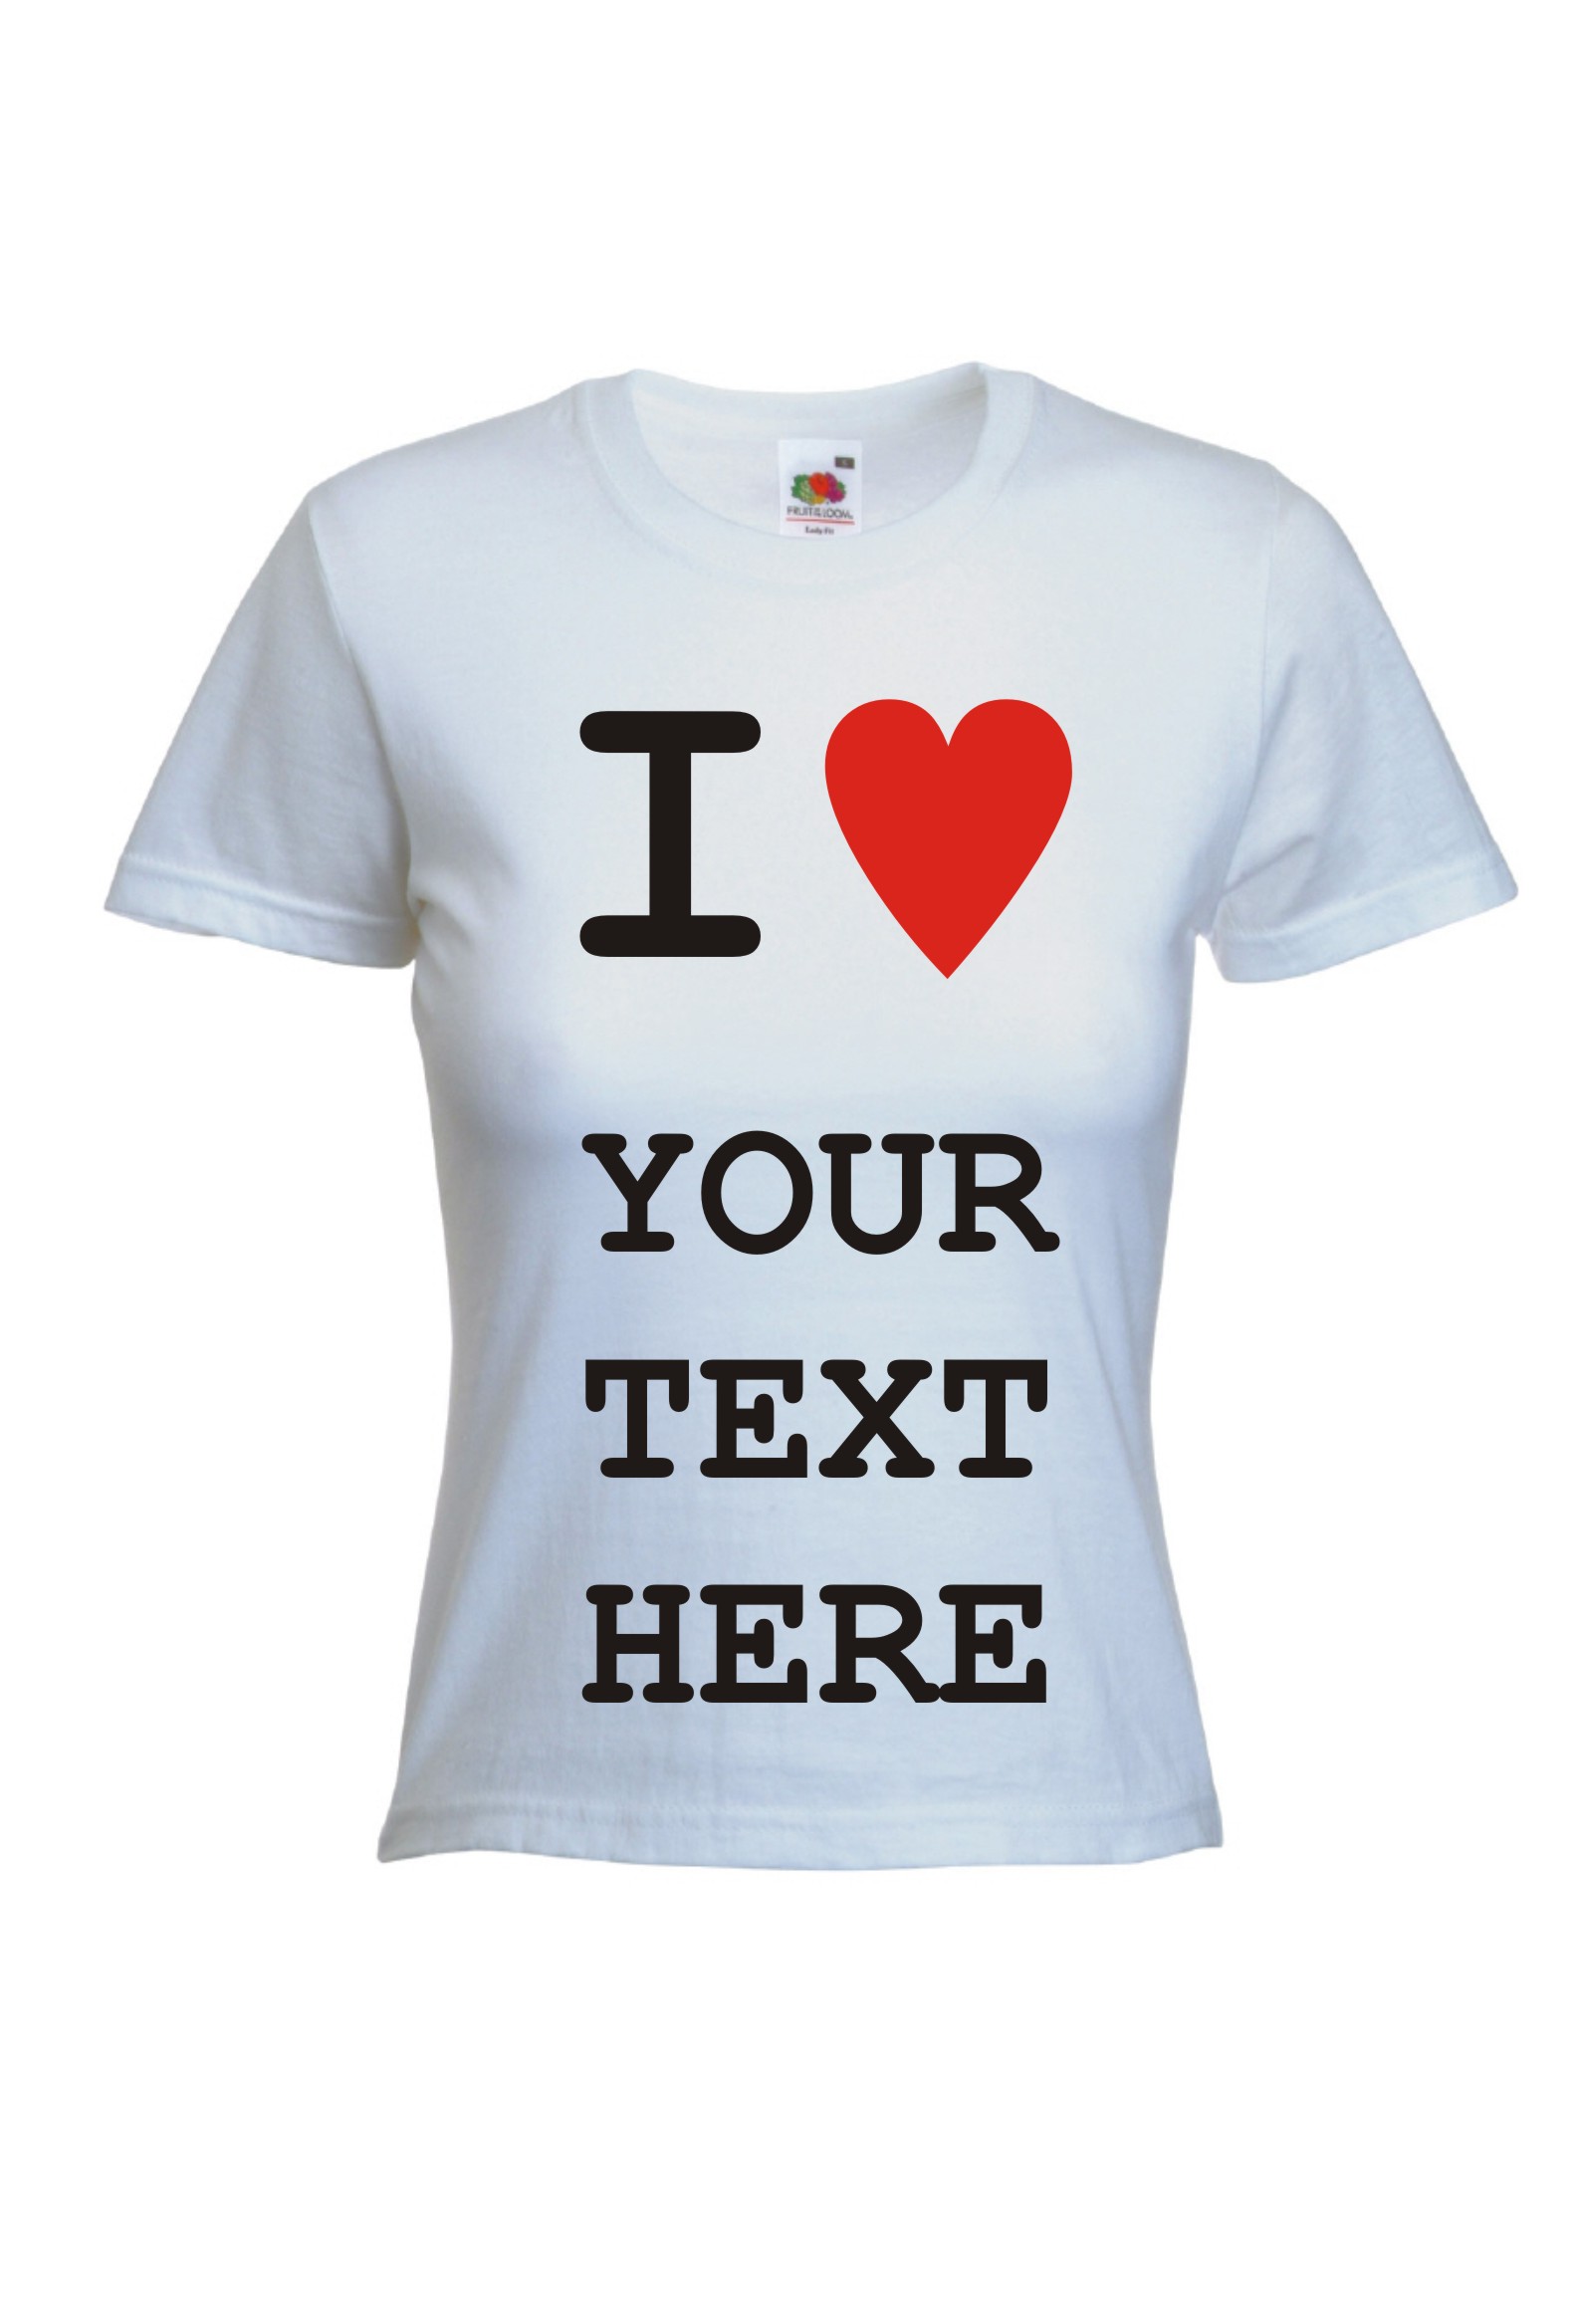 CUSTOM PERSONALISED DESIGN I HEART/LOVE - YOUR TEXT - T-SHIRT - LADIES ...